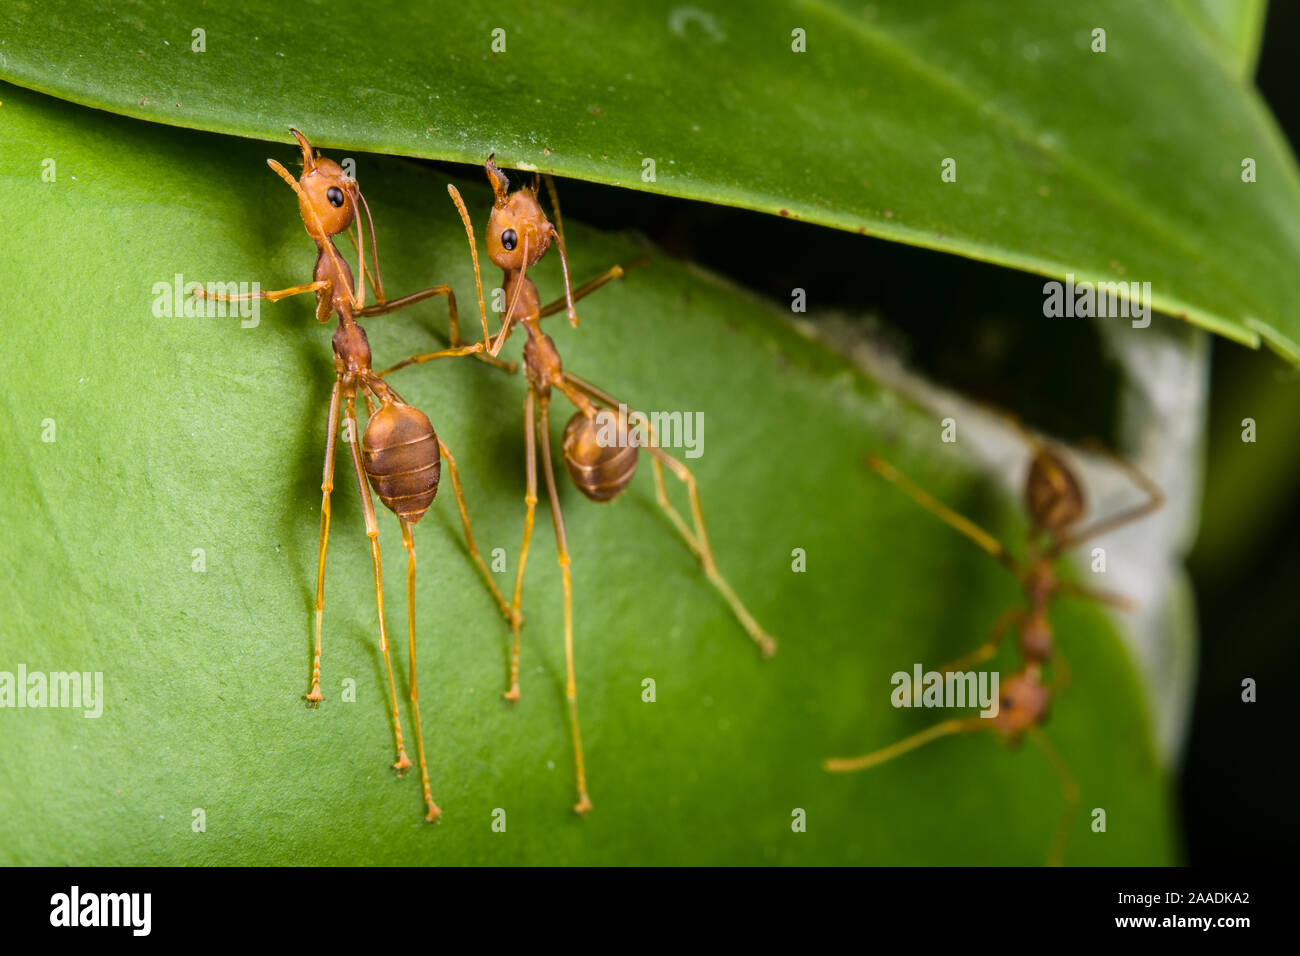 Weaver ants (Oecophylla smaragdina) building nest by gluing leaves together with silk, Sabah, Malaysian Borneo. Stock Photo